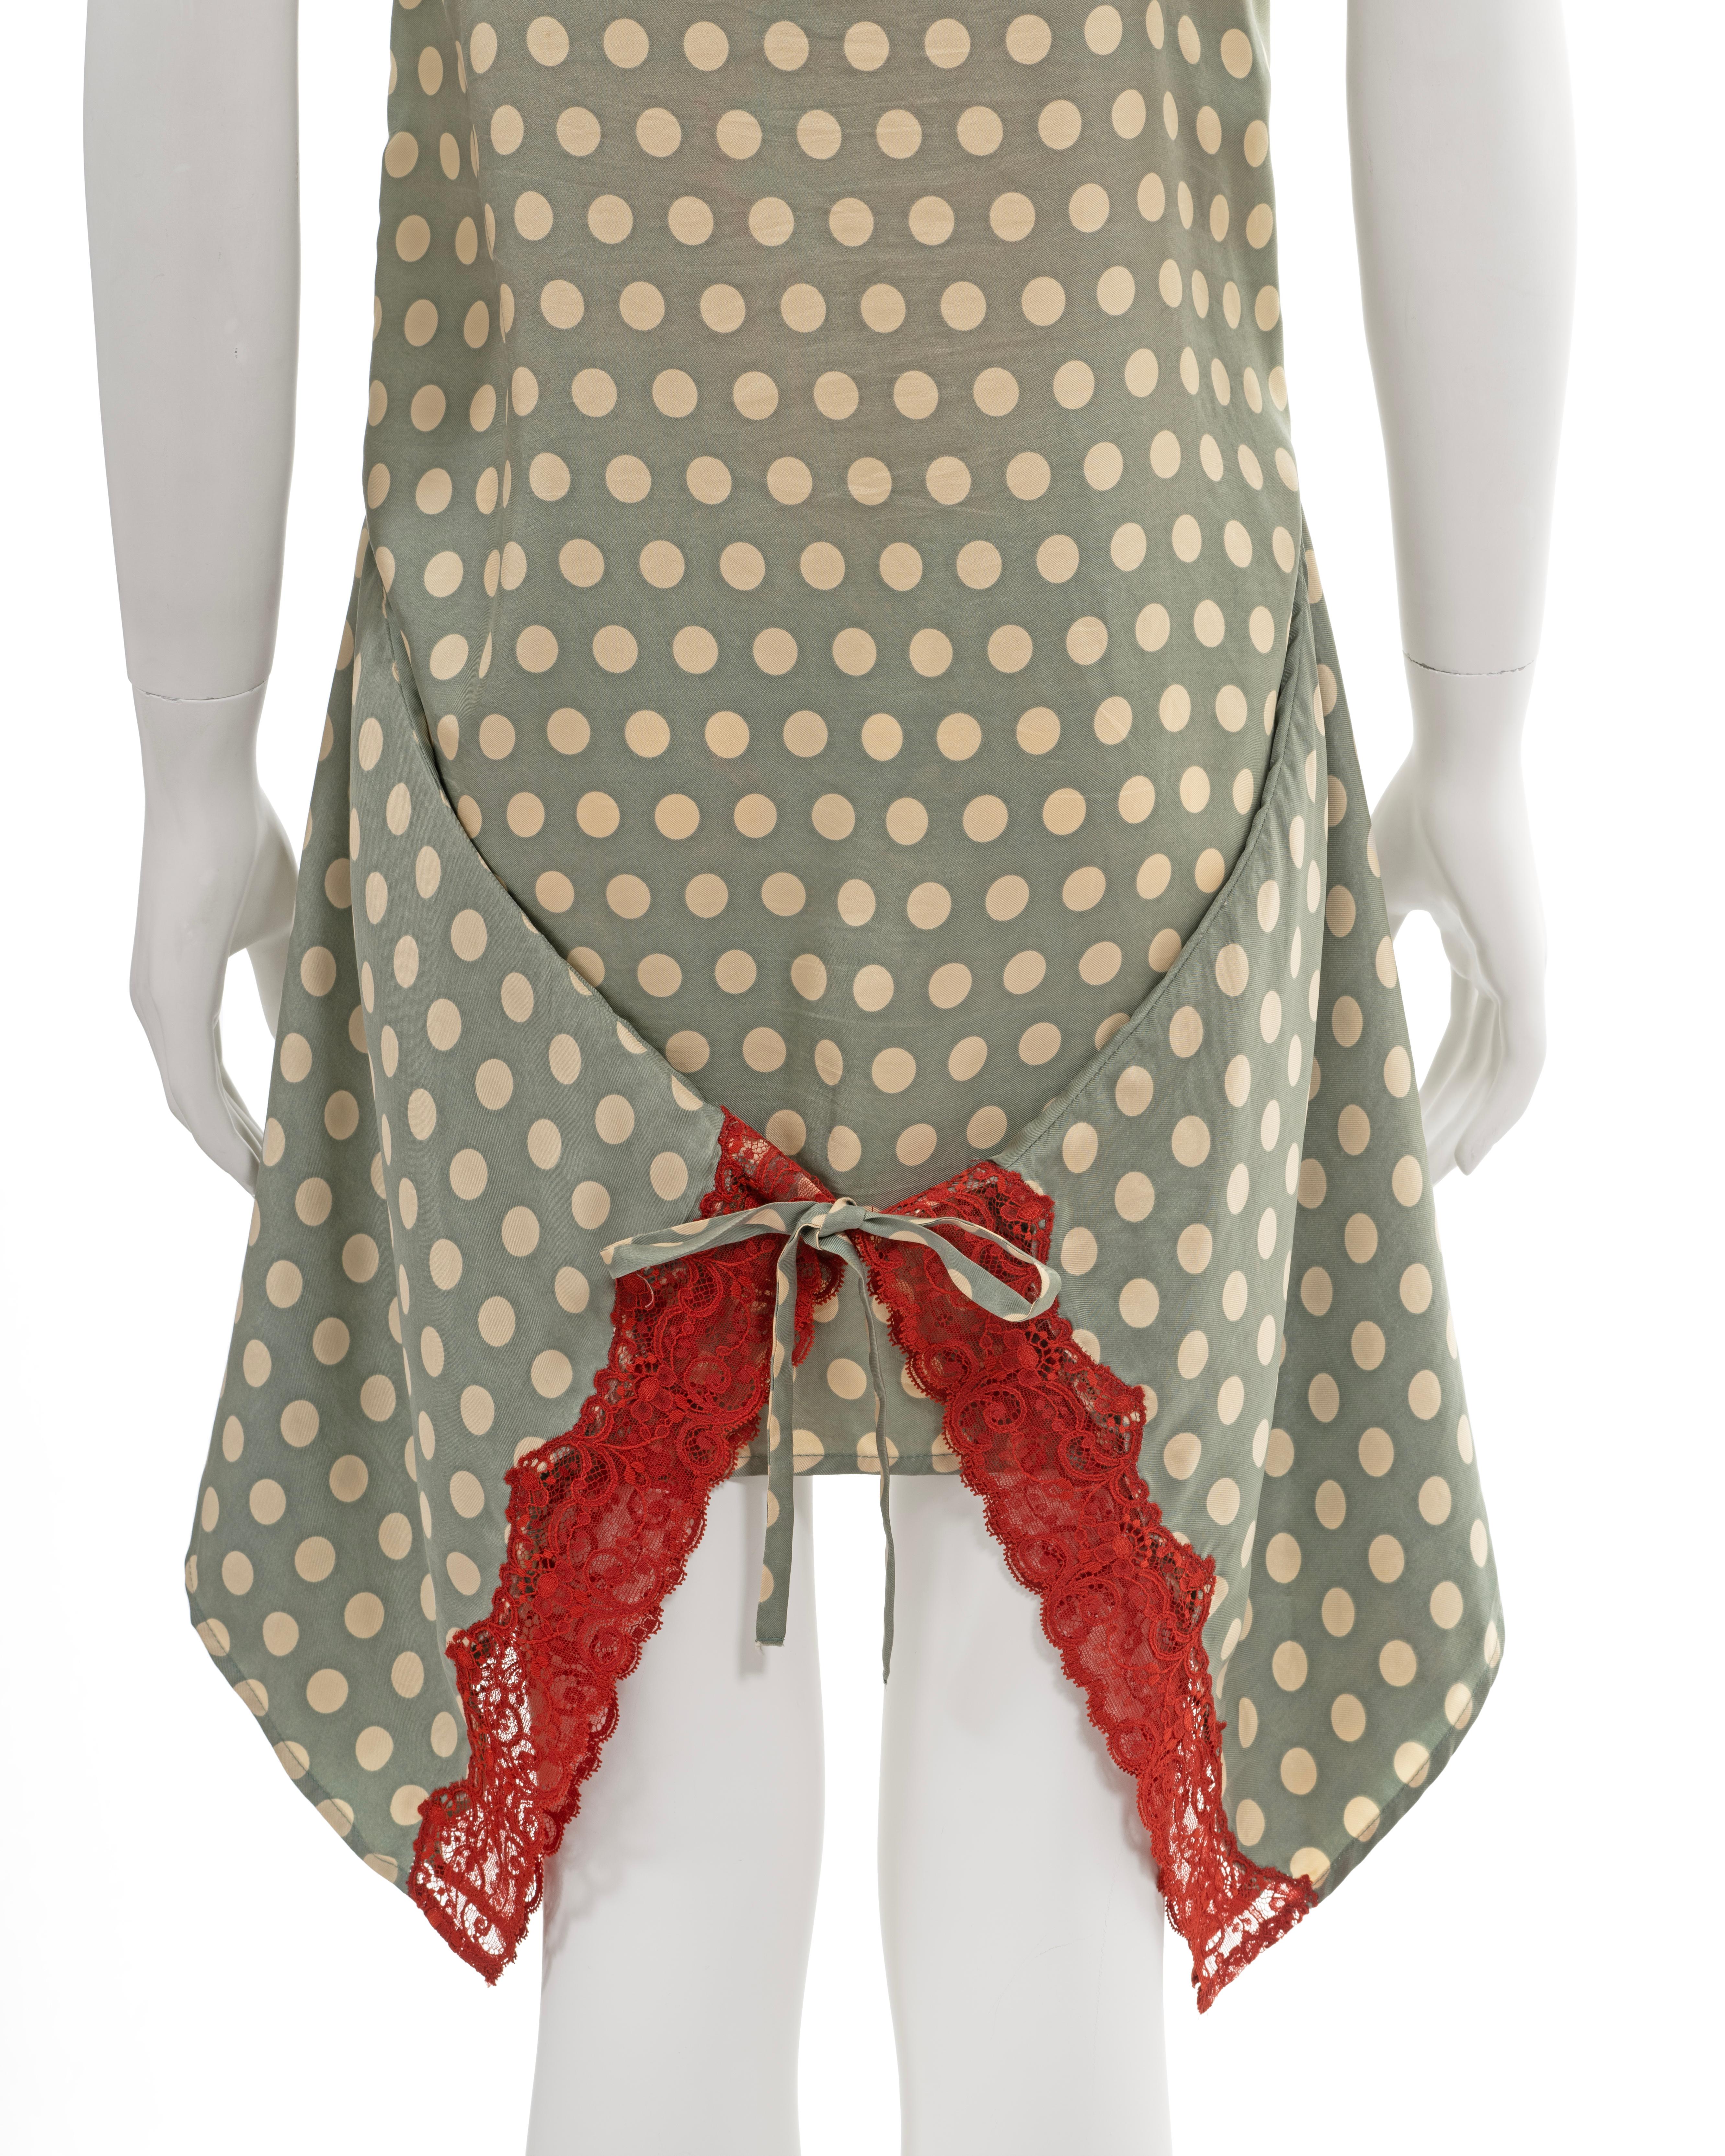 Jean Paul Gaultier green polkadot silk slip dress with red lace trim, ss 1992 For Sale 6